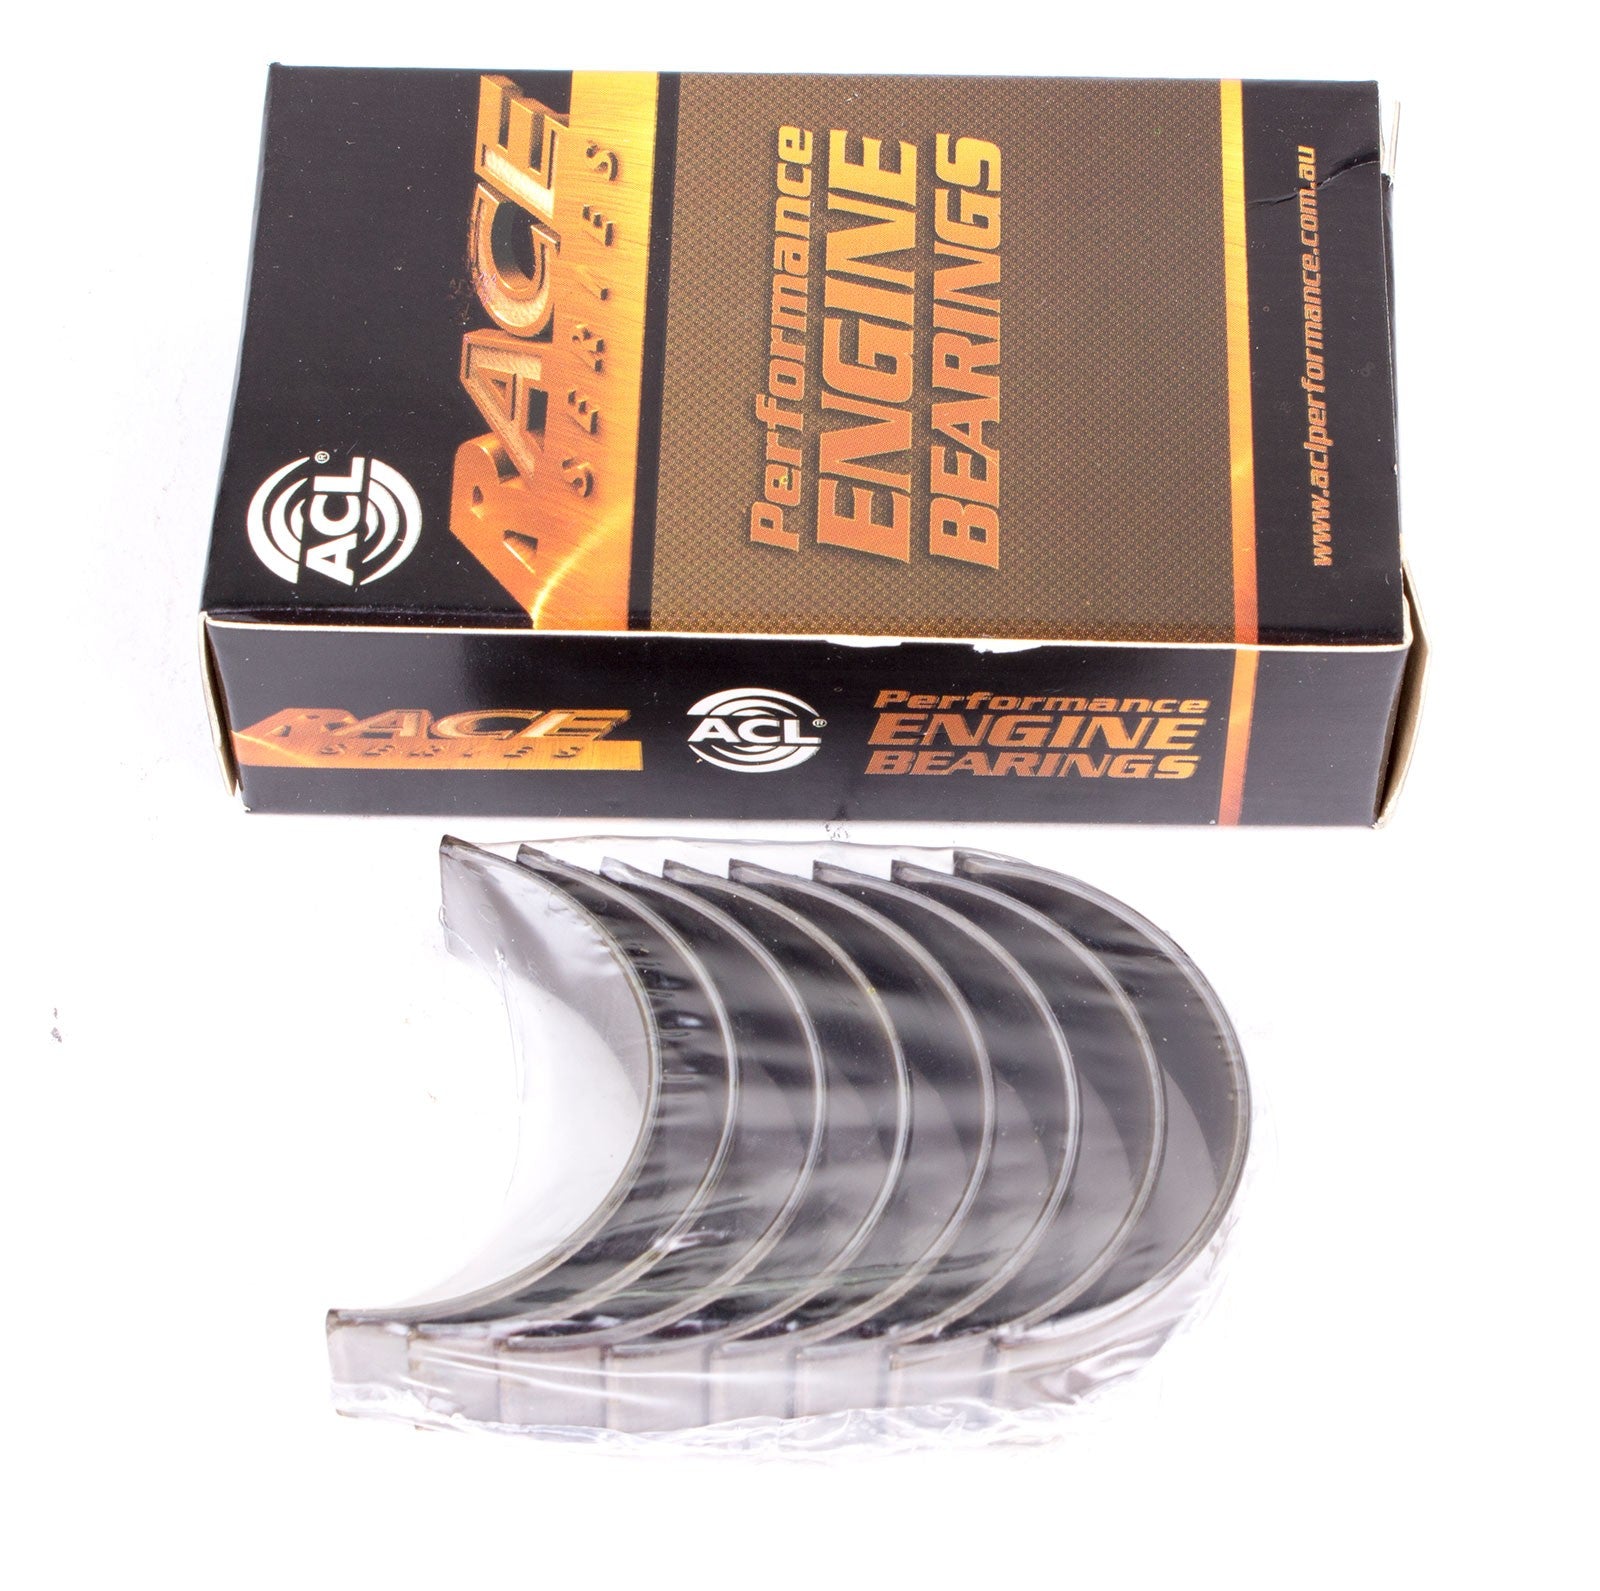 ACL 5M2327H-.025 Main bearing set (ACL Race Series) Photo-0 